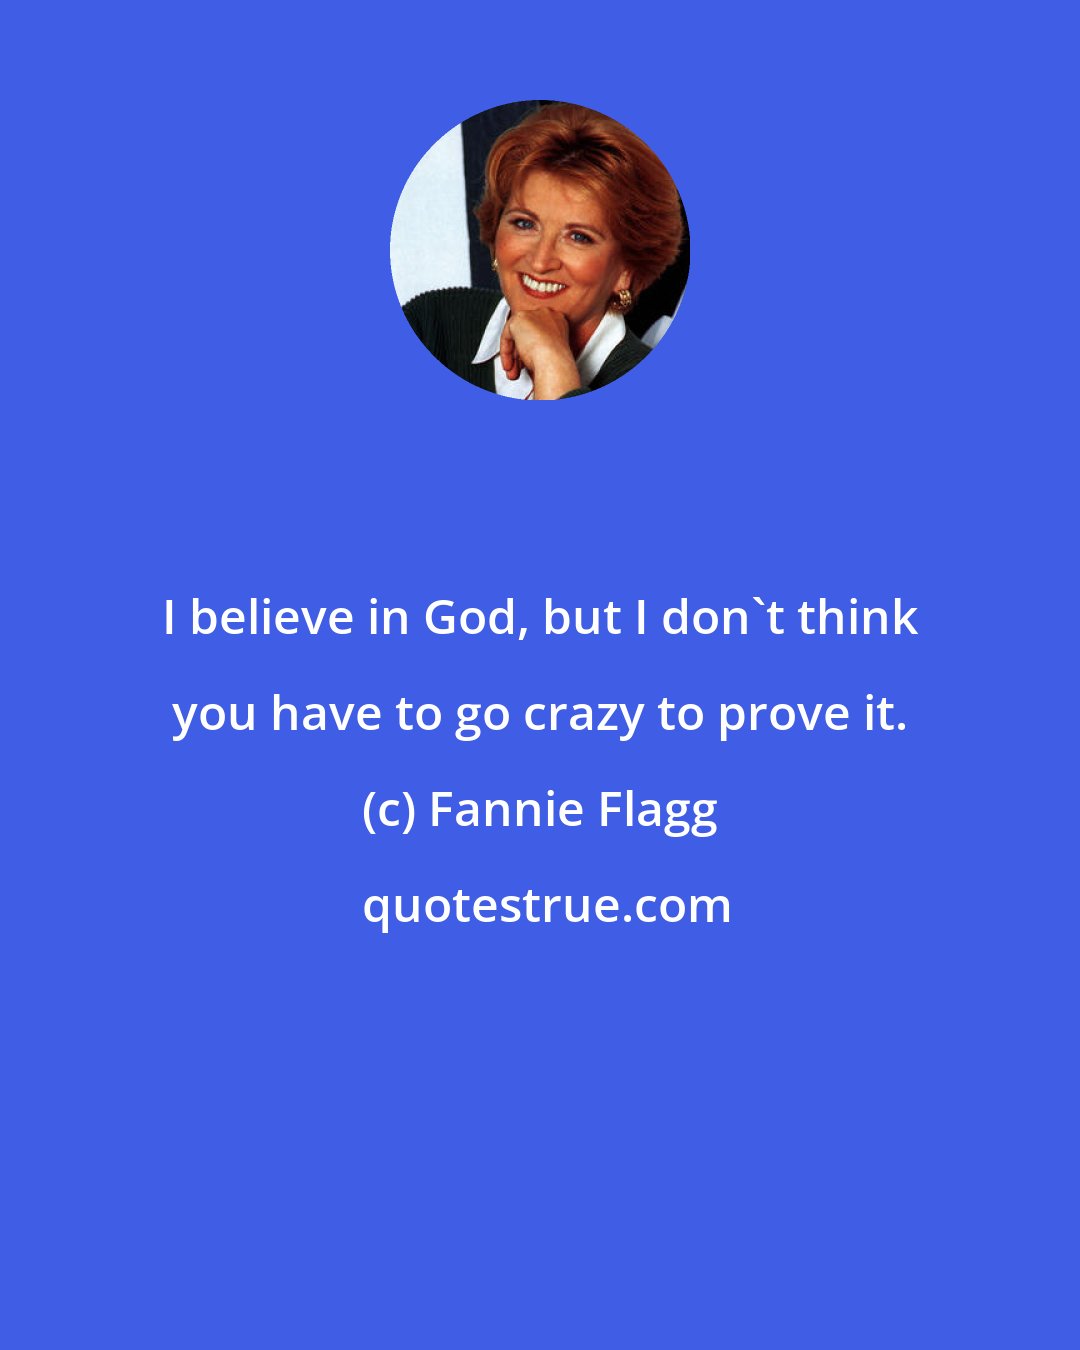 Fannie Flagg: I believe in God, but I don't think you have to go crazy to prove it.